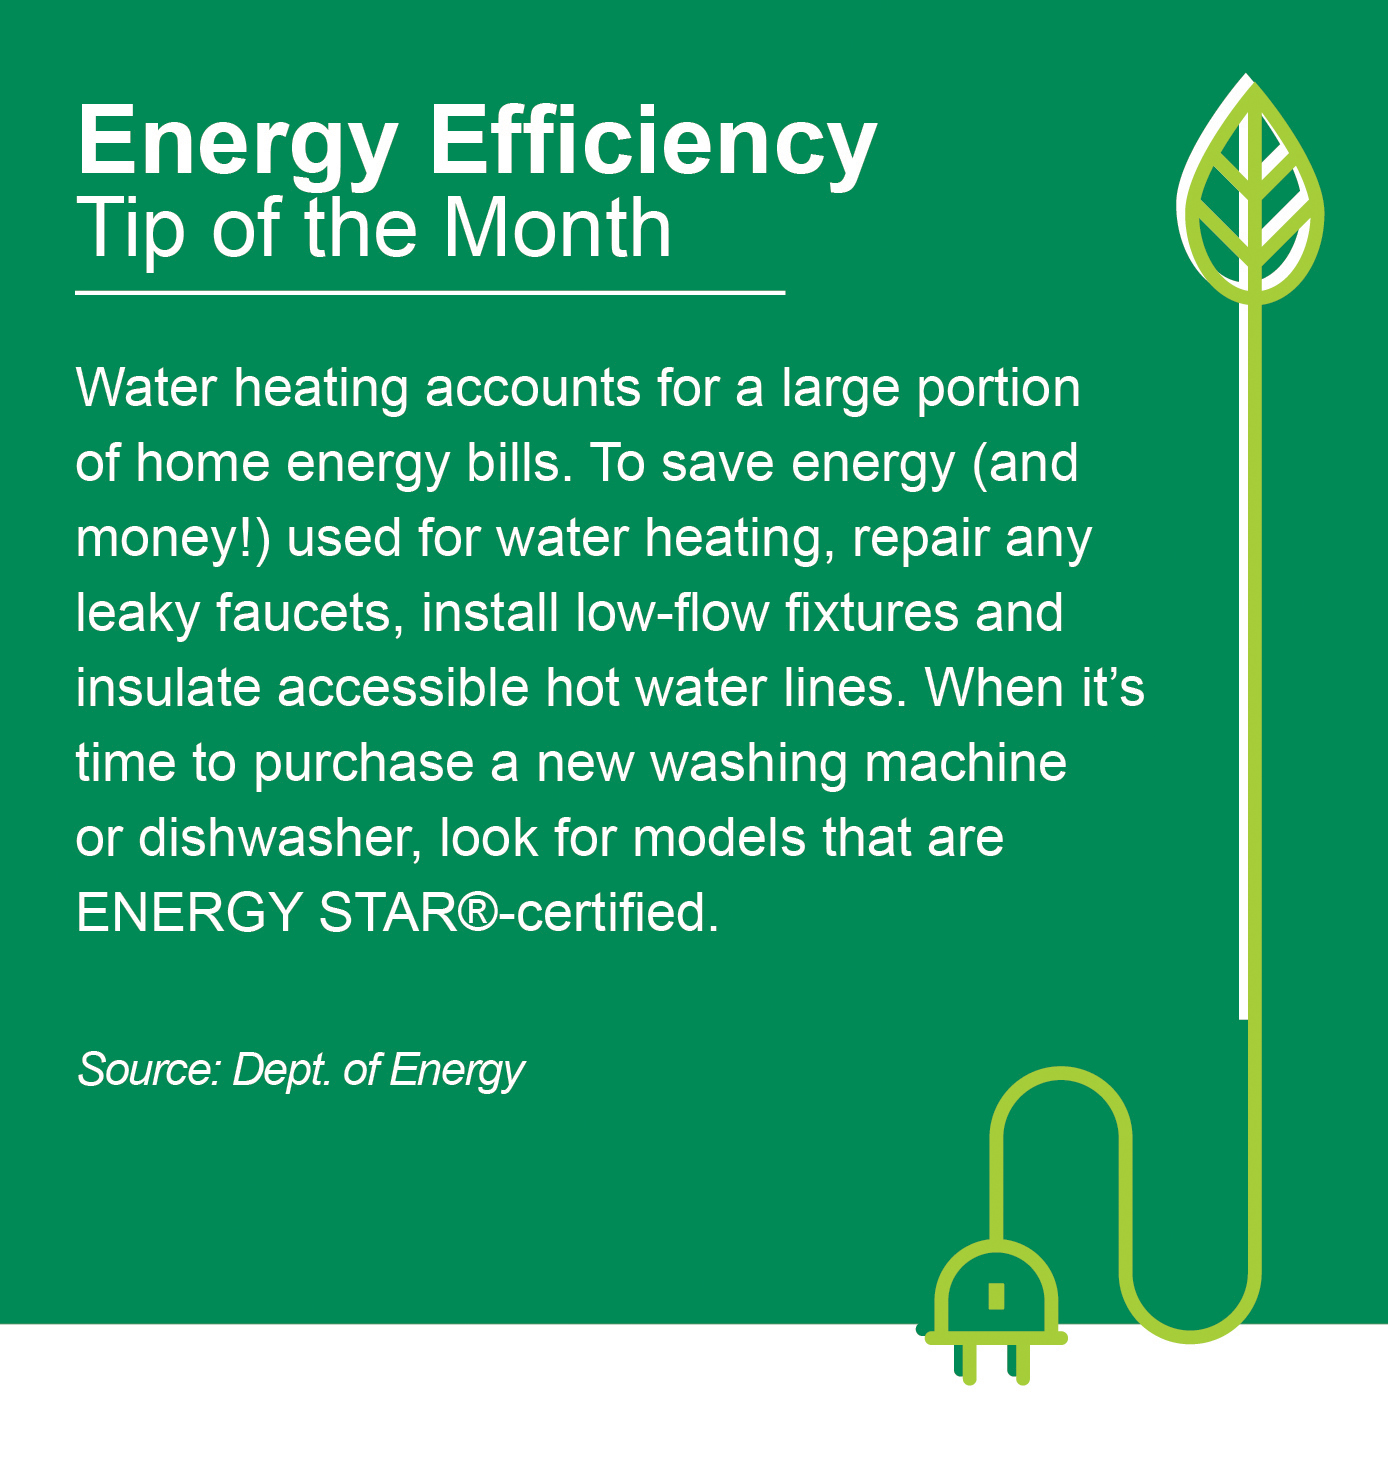 Energy Efficiency Tip of the Month: Water heating accounts for a large portion of home energy bills. To save energy (and money!) used for water heating, repair any leaky faucets, install low-flow fictures and insulate accessible hot water lines. When it's time to purchase a new washing machine or dishwasher, look for models that are ENERGY STAR®-certified. Source: Dept. of Energy